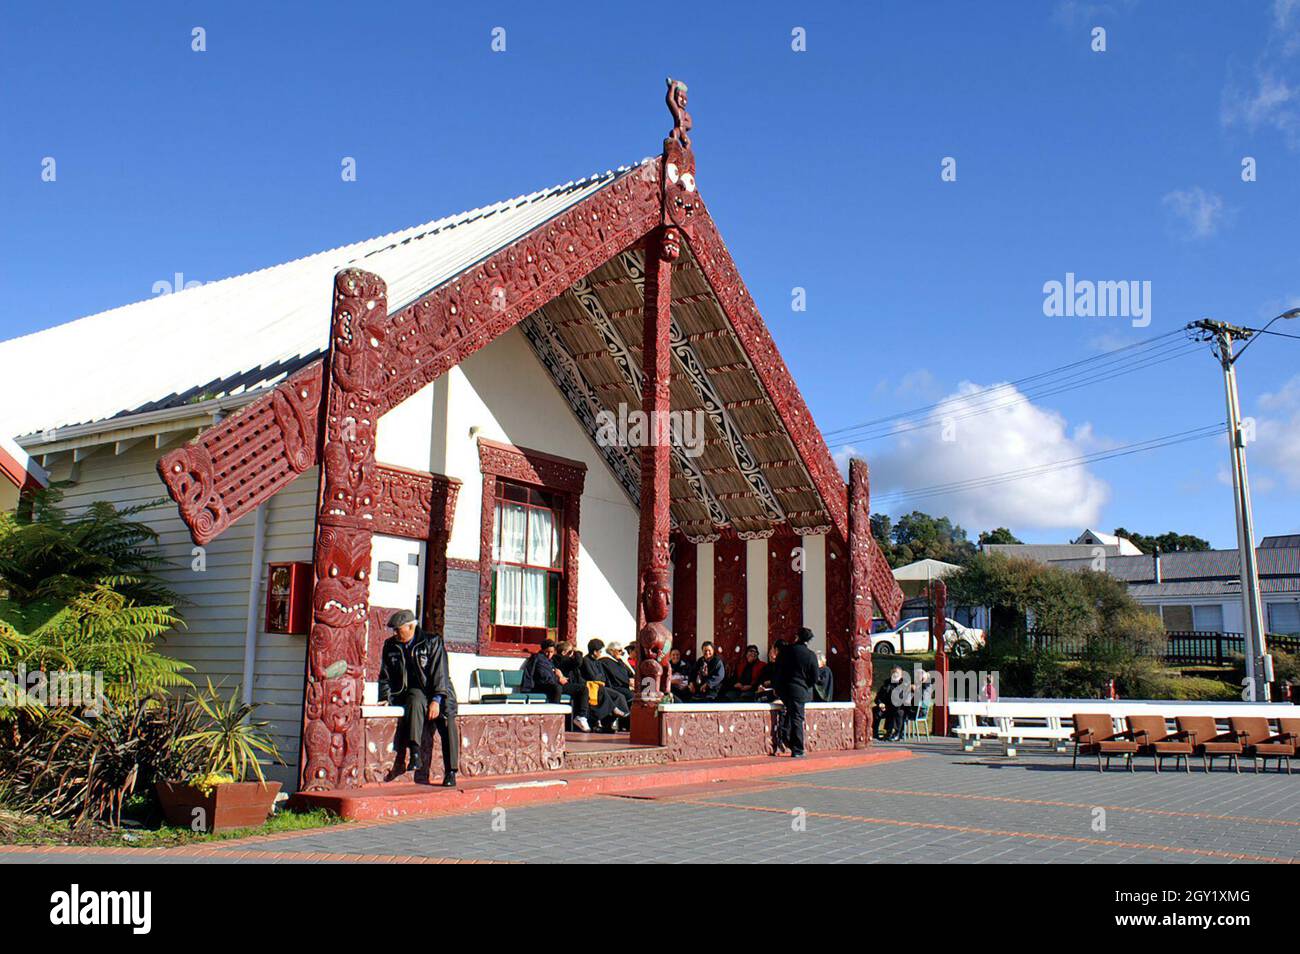 People gather at a meeting house on a marae for a funeral.  The meeting house, also known as a whare or wharenui, is a central meeting place for the Maori community in New Zealand. Stock Photo